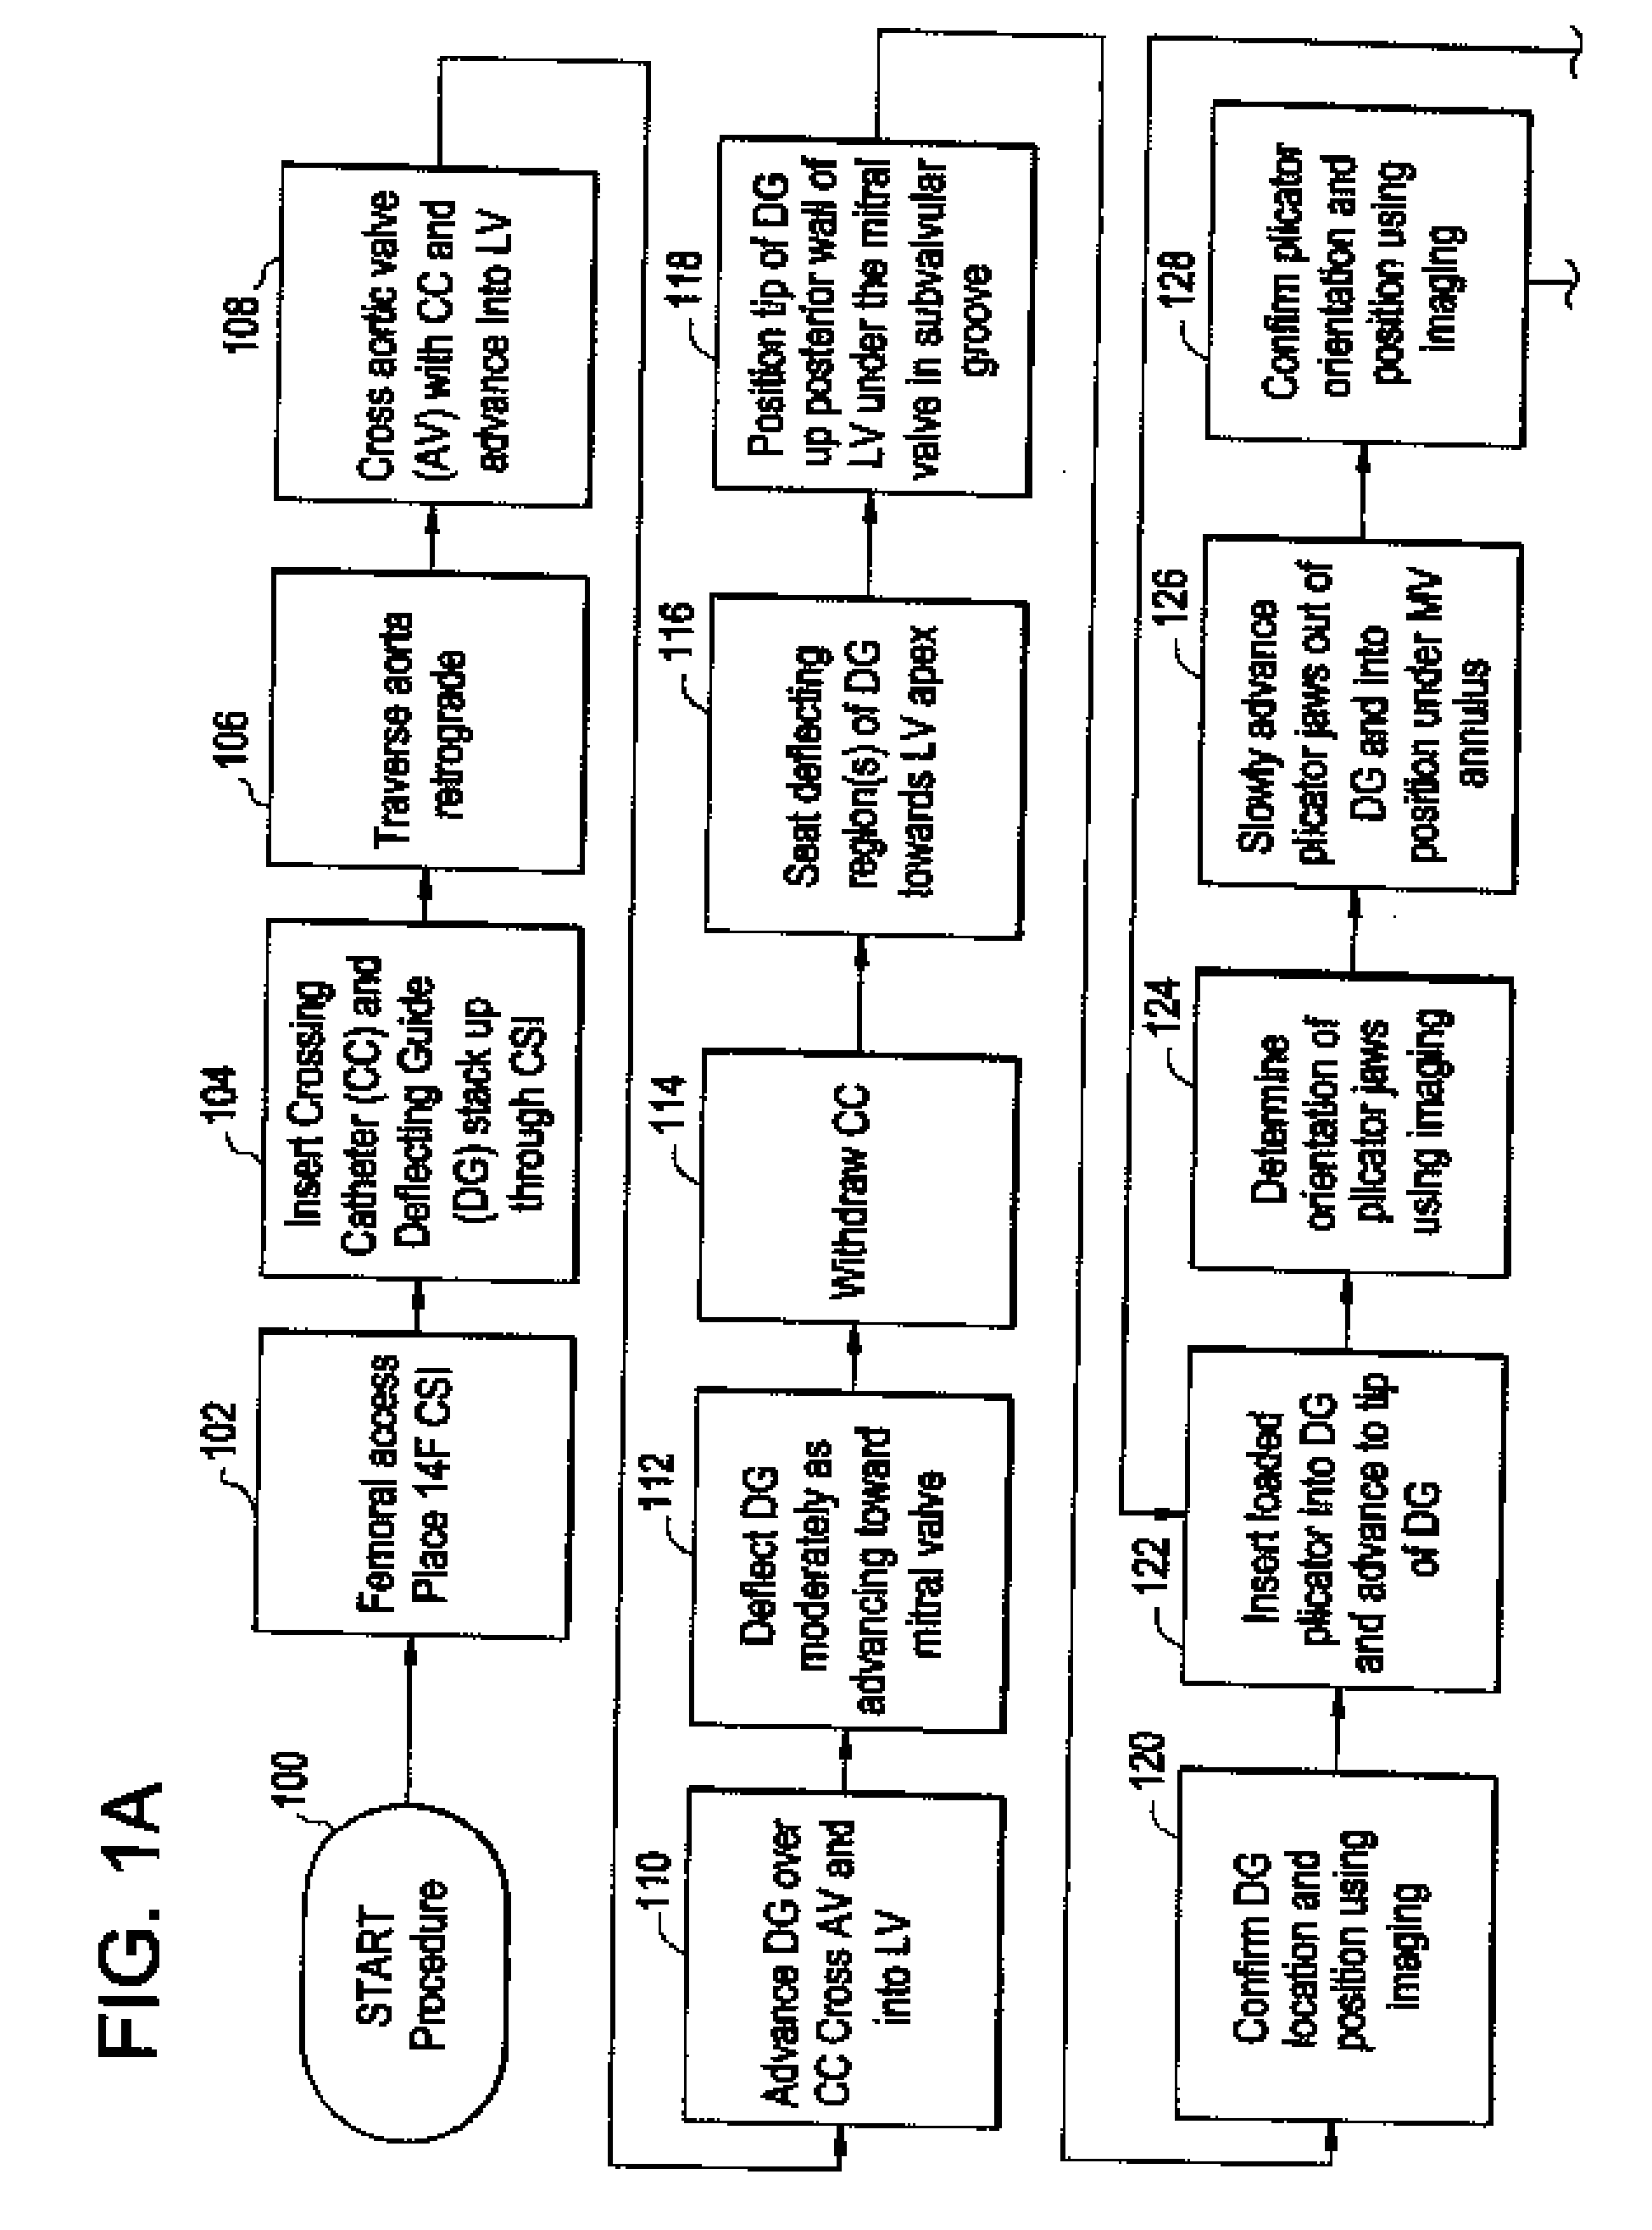 System using a helical retainer in the direct plication annuloplasty treatment of mitral valve regurgitation